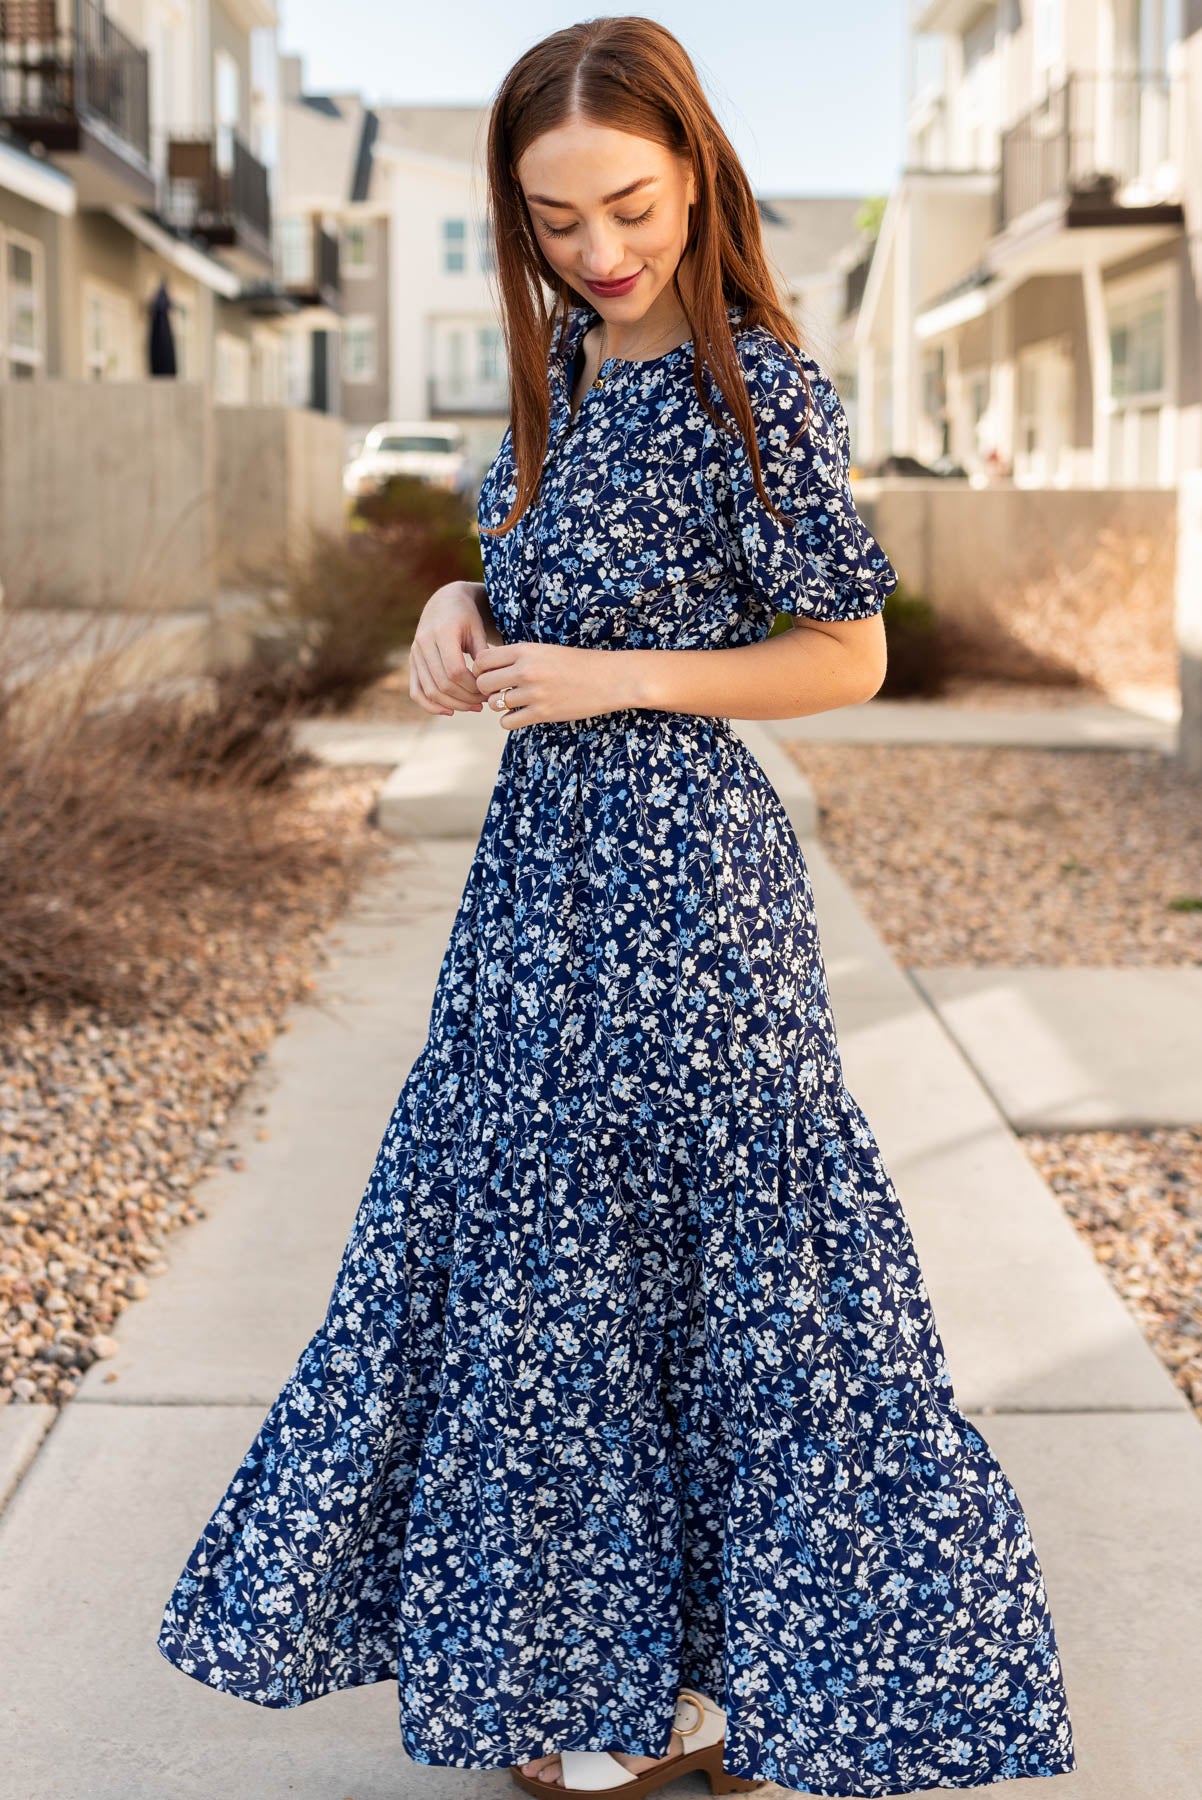 Side view of the navy floral dress